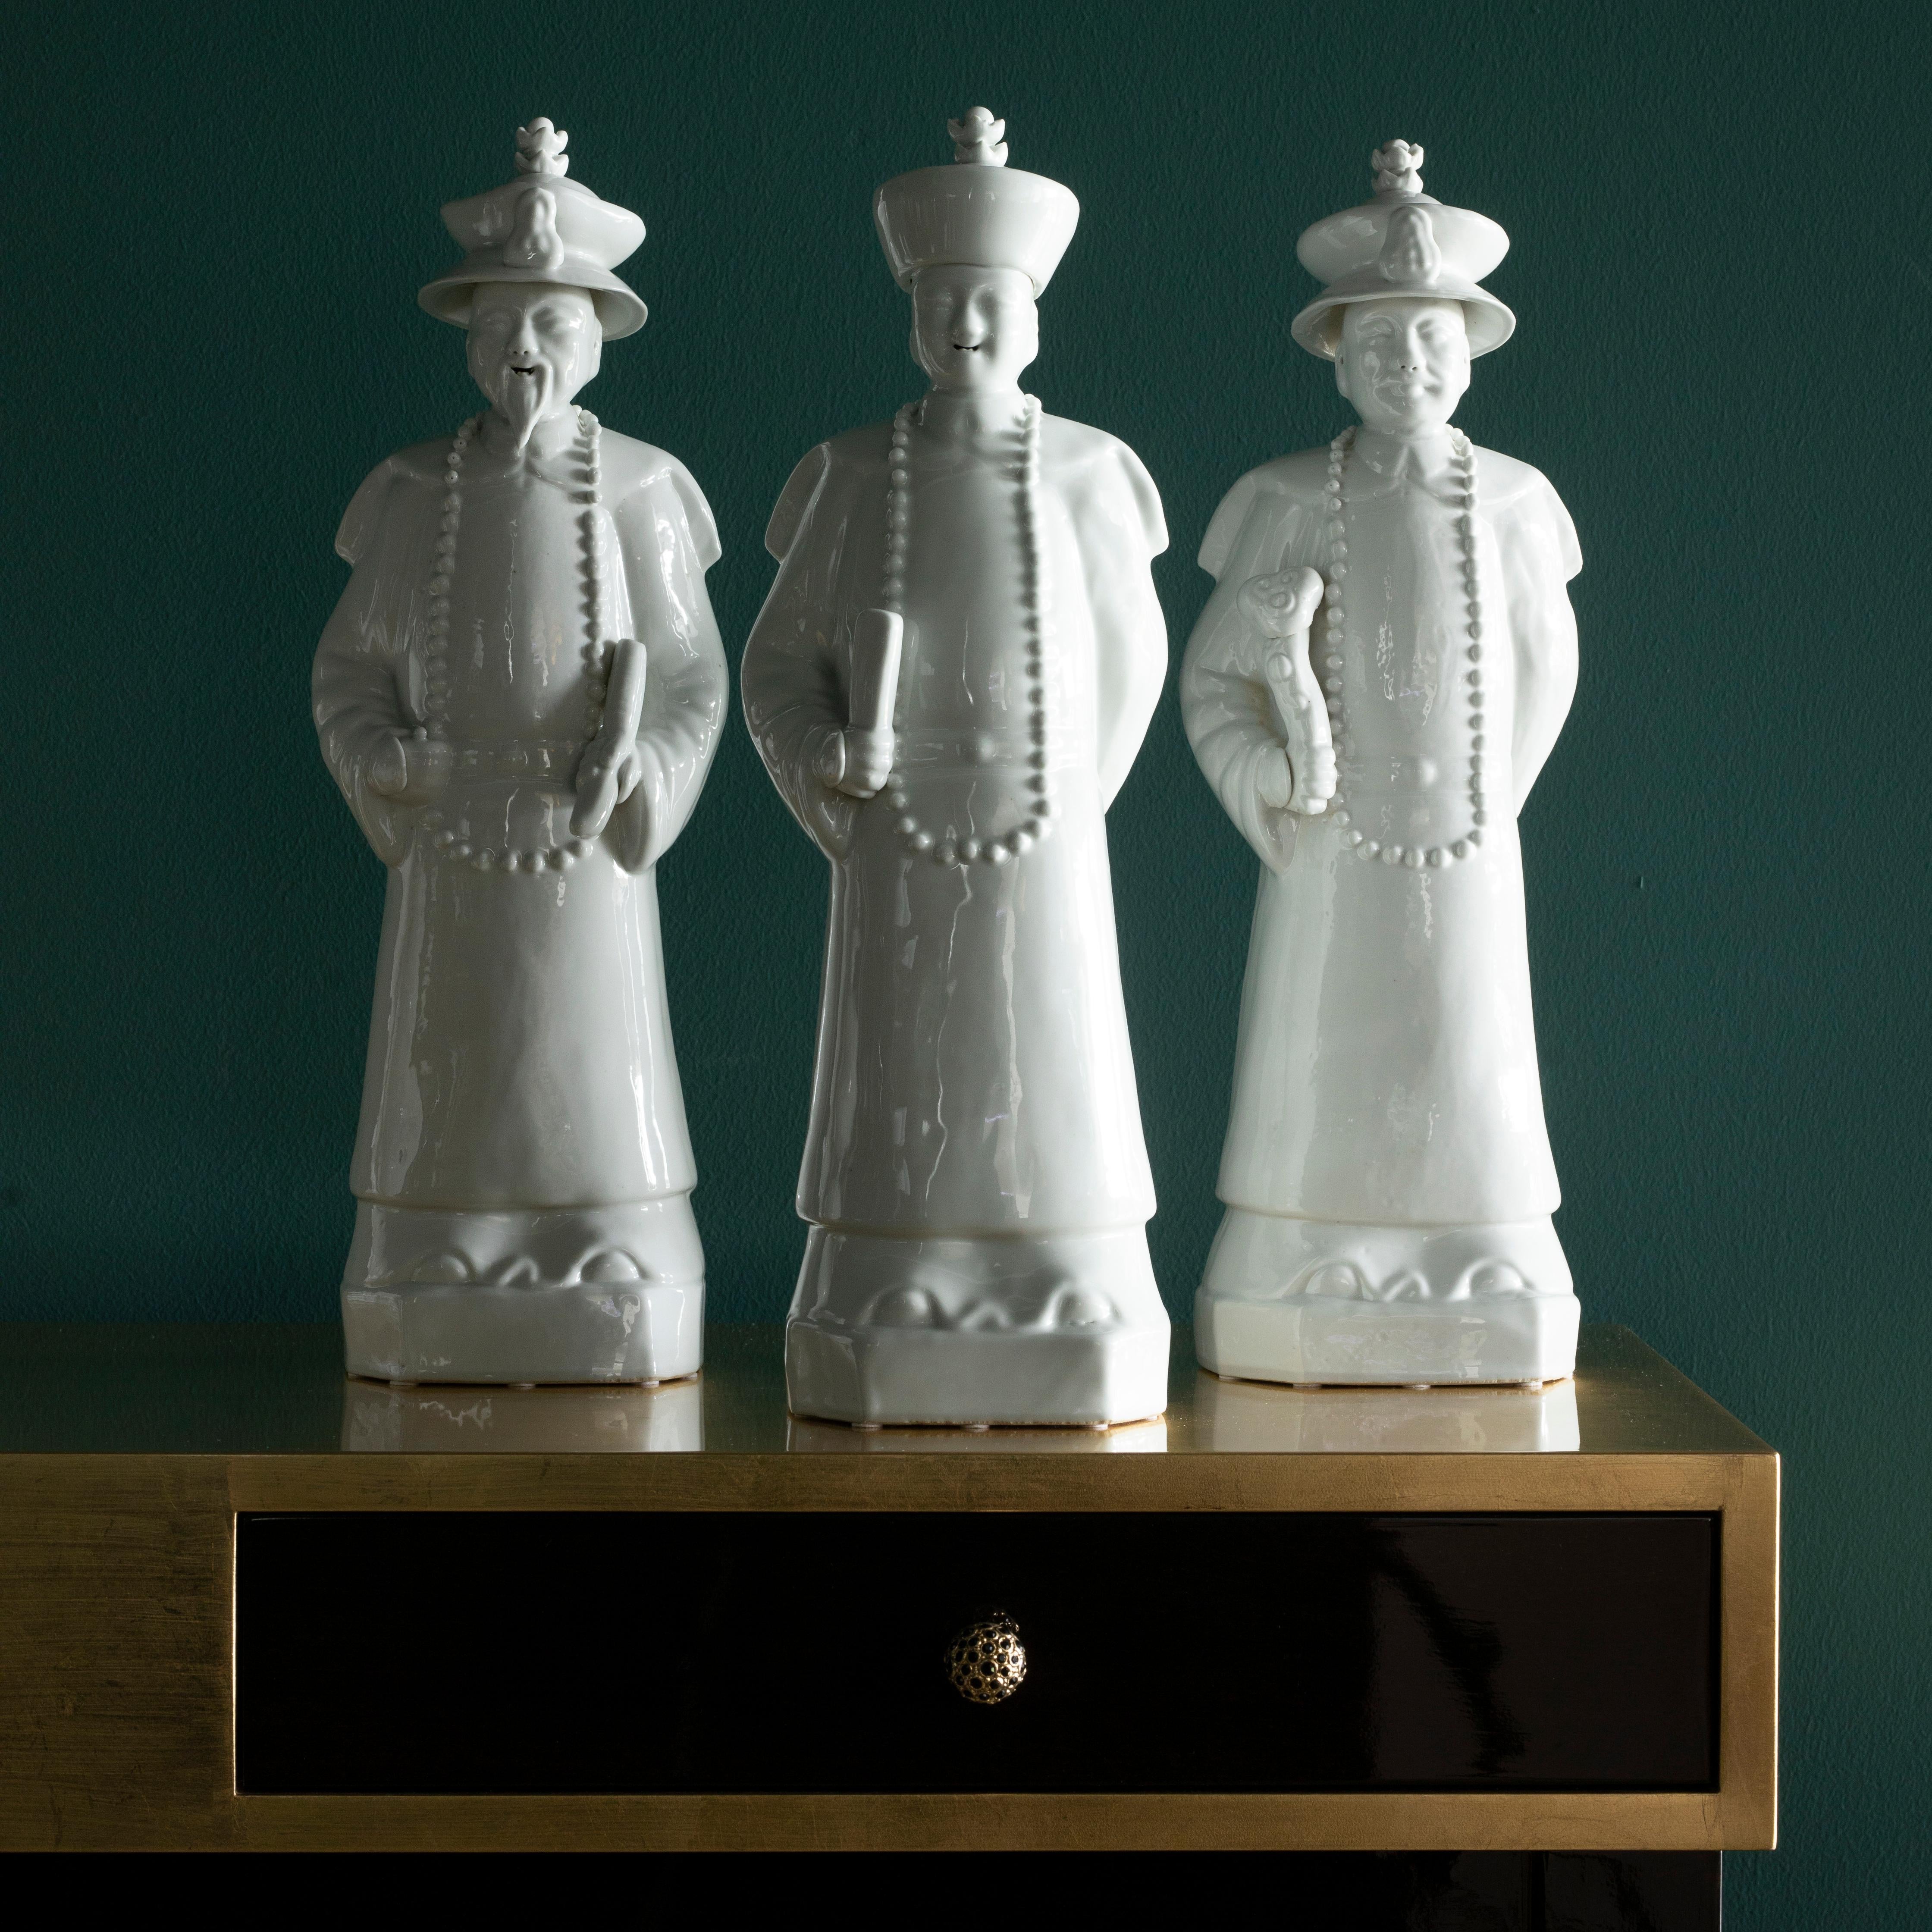 Set/3 Qing Emperor Porcelain Statues, Lusitanus Home Collection by Legend of Asia.

Real chinese porcelain statues in white, produced by hand with traditional methods. The longtime relationship between Portugal and Macau is celebrated with this